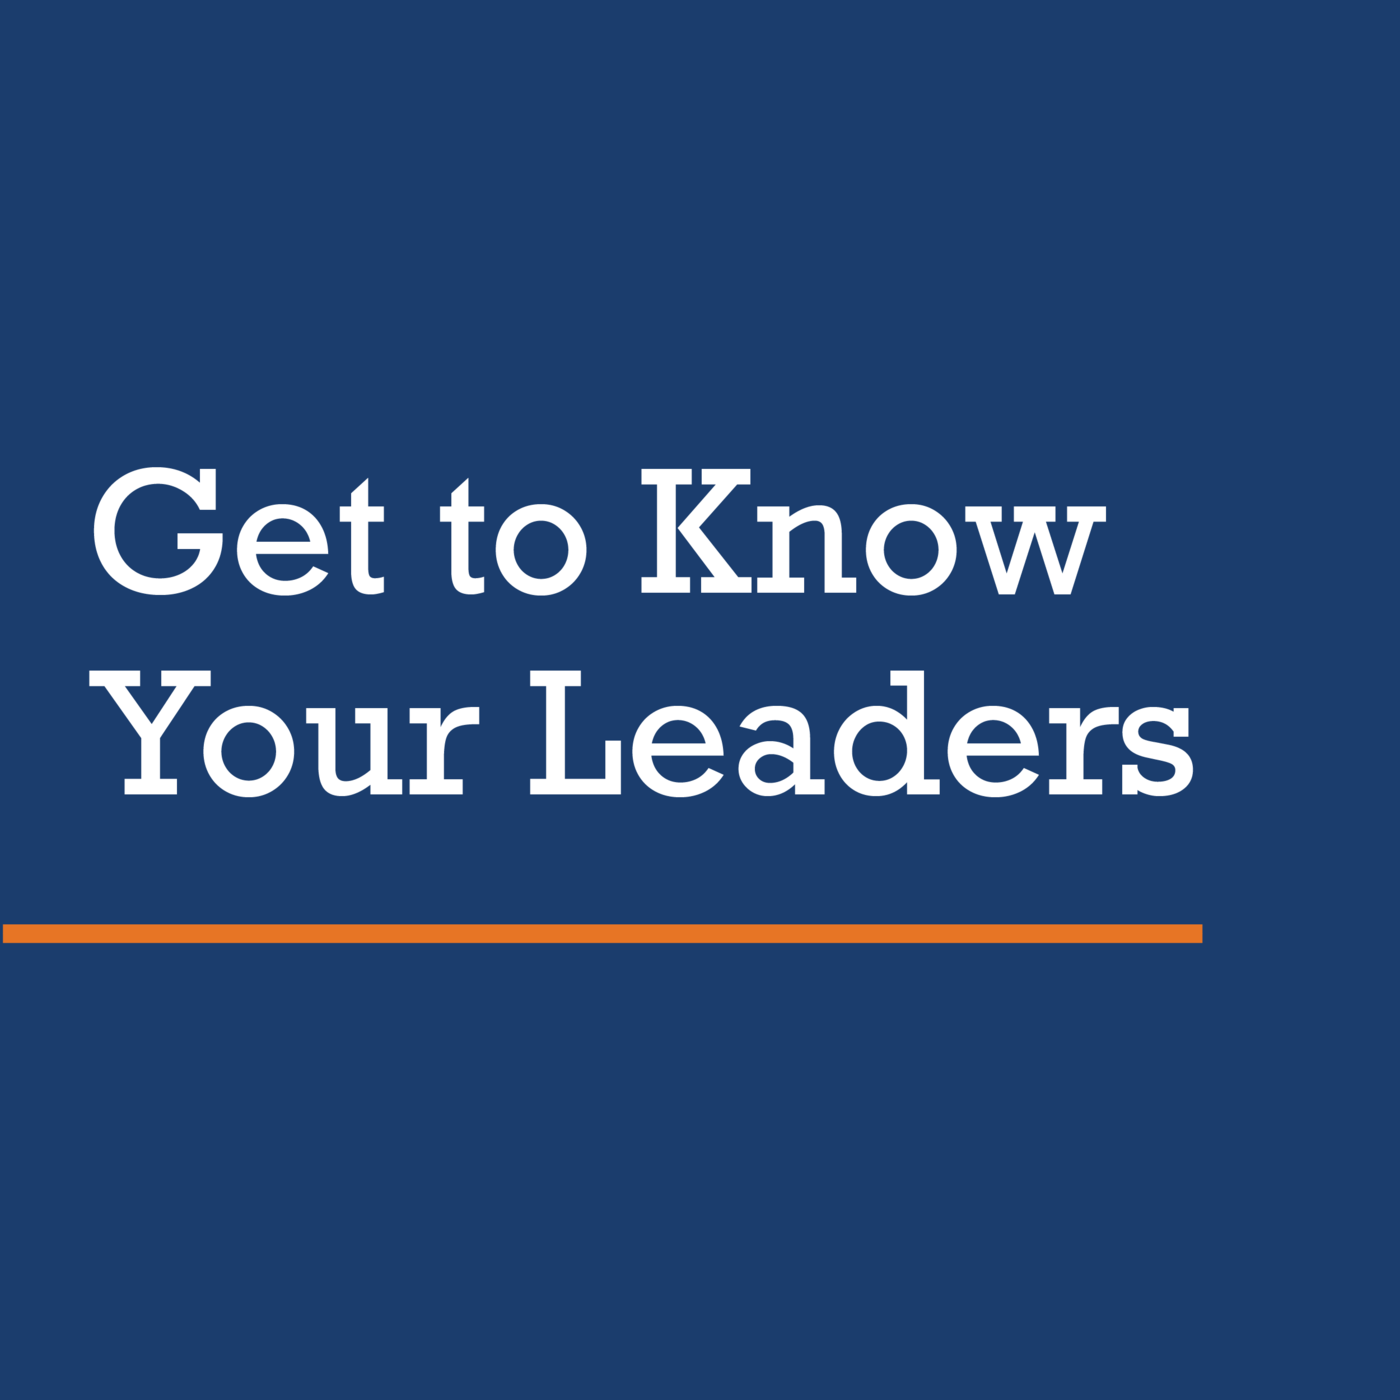 Get to know your leaders